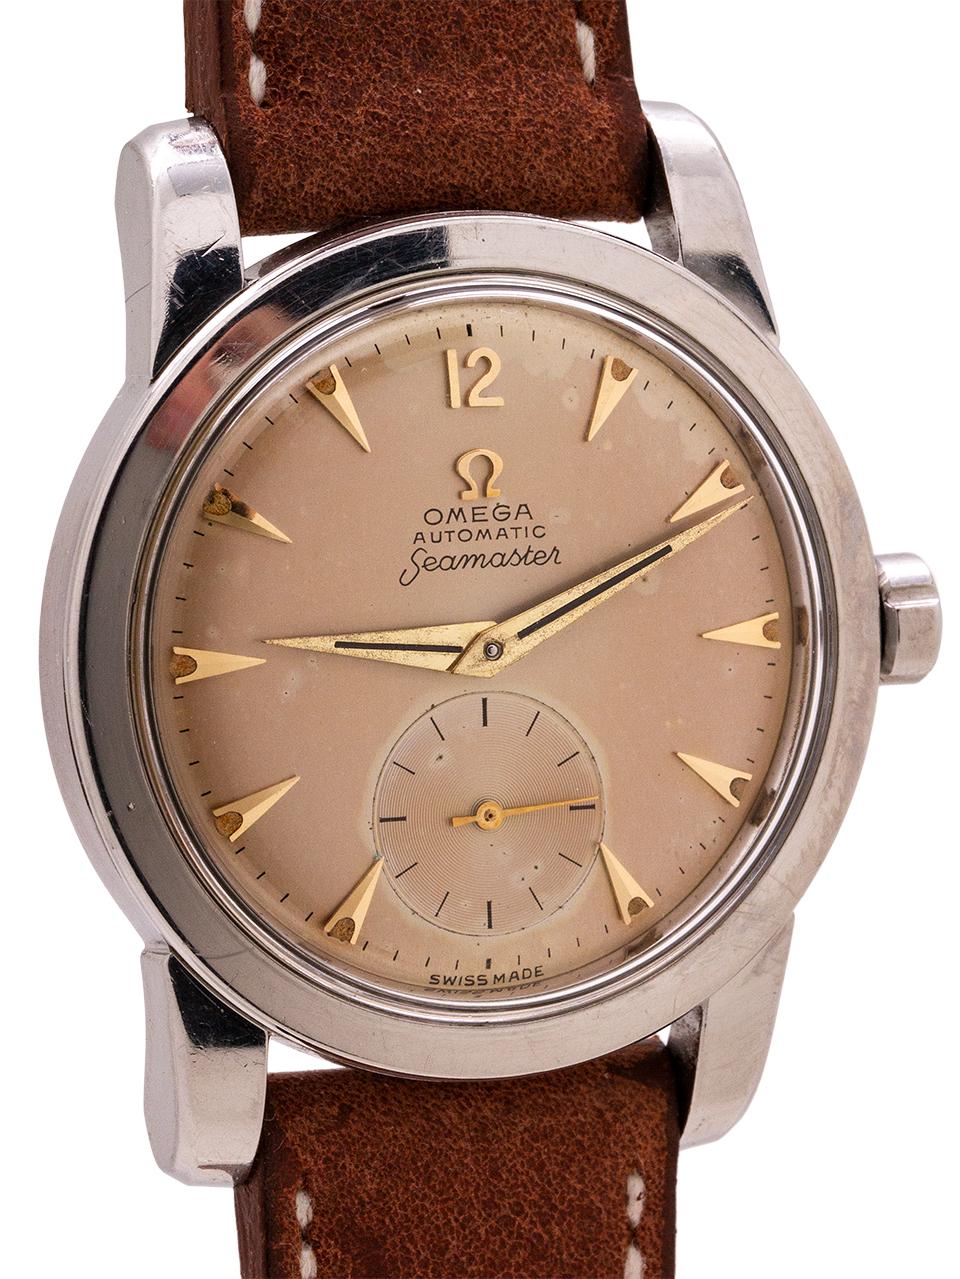 
A great looking vintage man’s Omega Seamaster ref 2576-4. circa 1950’s. Featuring a 34mm stainless steel case with screw down back and signed Omega crown. With gorgeous original warmly patina’d “tropical” dial with gold applied triangular applied